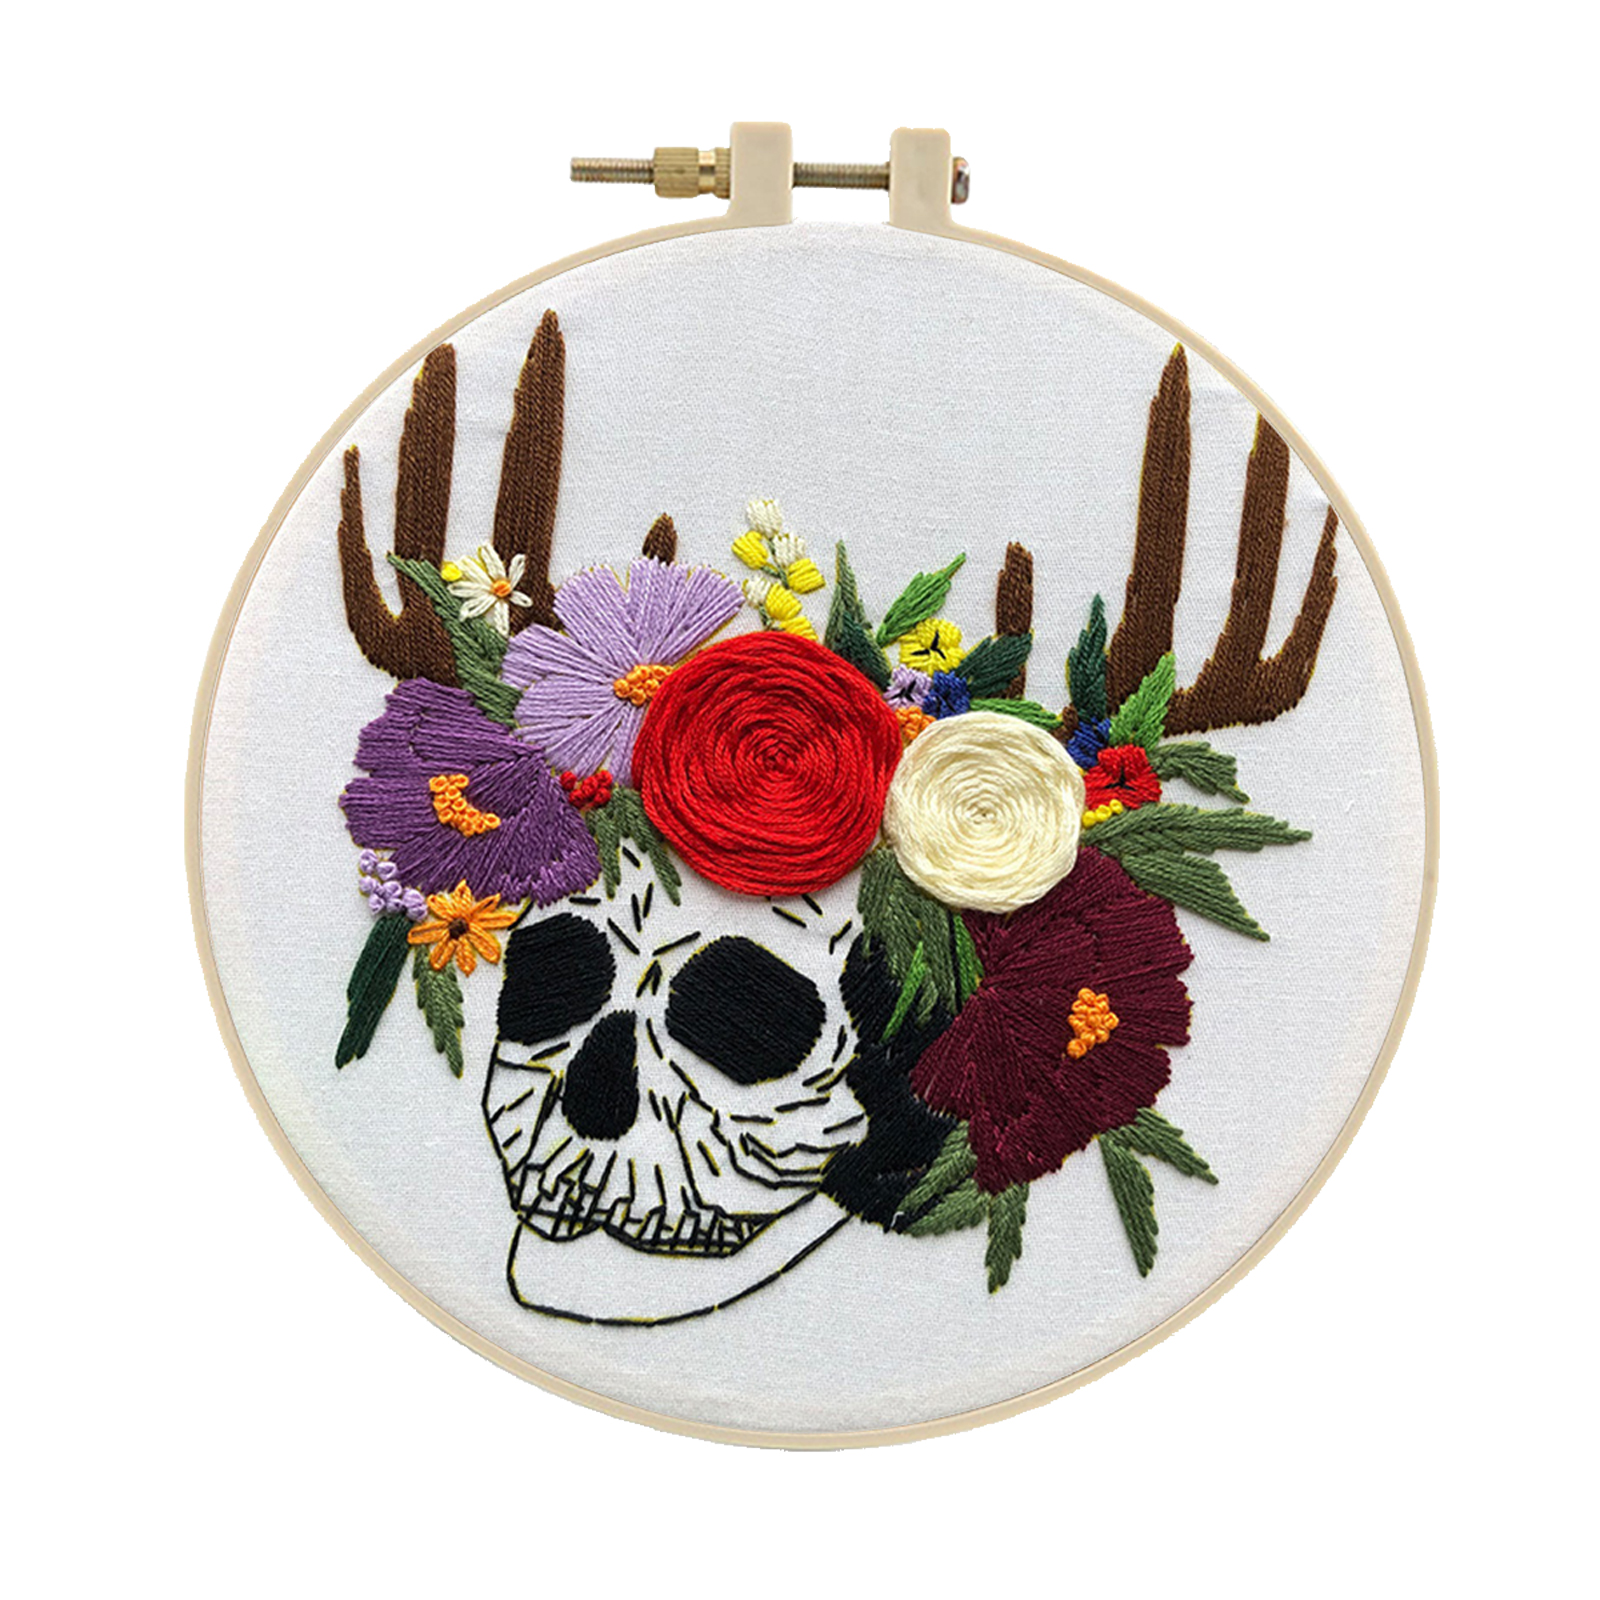 Craft Hand Embroidery Kit Cross stitch kit for Adult Beginner - Skull Pattern